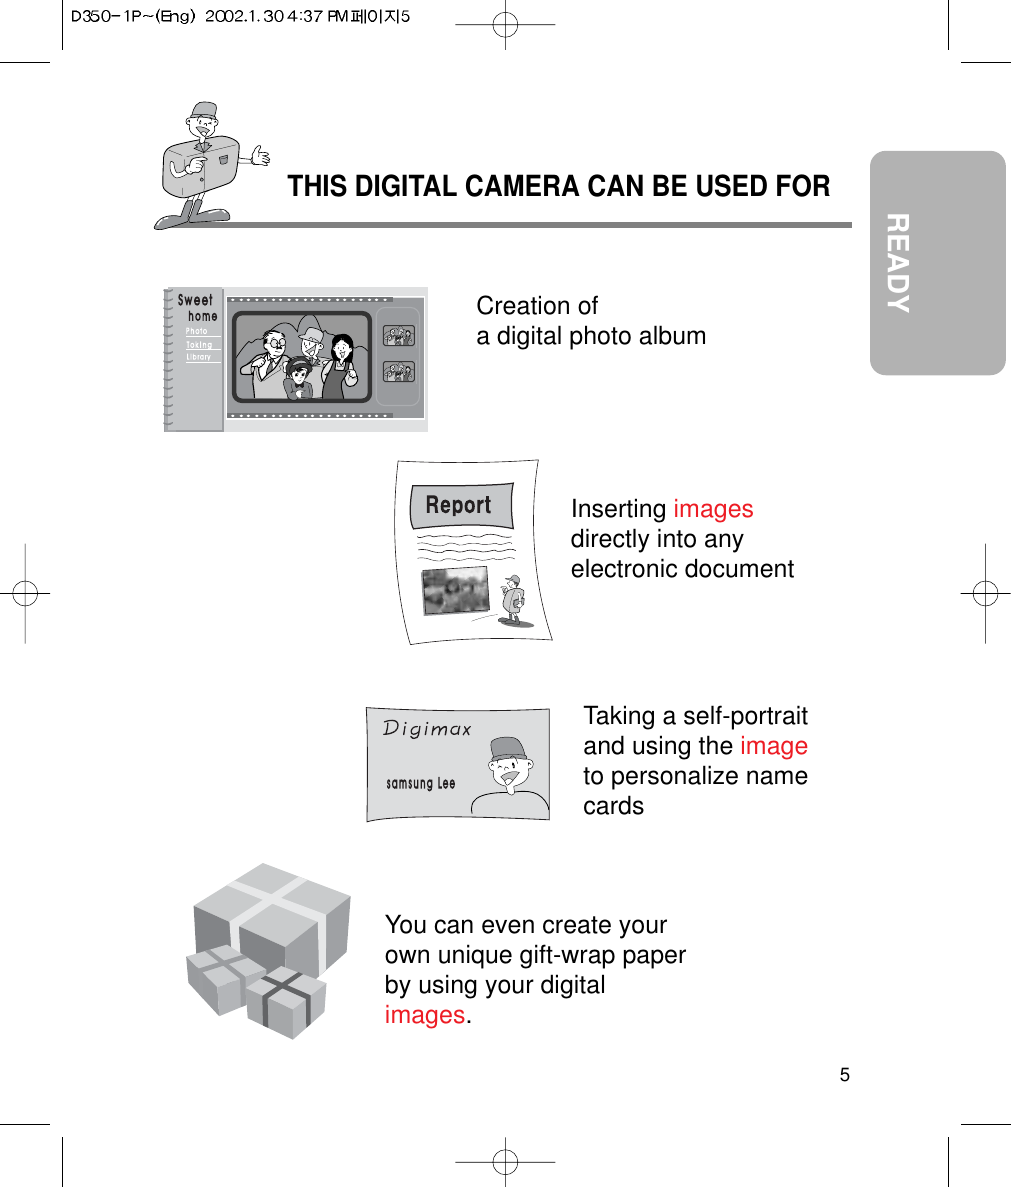 READYTHIS DIGITAL CAMERA CAN BE USED FOR5Inserting imagesdirectly into any electronic documentTaking a self-portrait and using the imageto personalize namecardsYou can even create yourown unique gift-wrap paperby using your digitalimages. Creation of a digital photo album